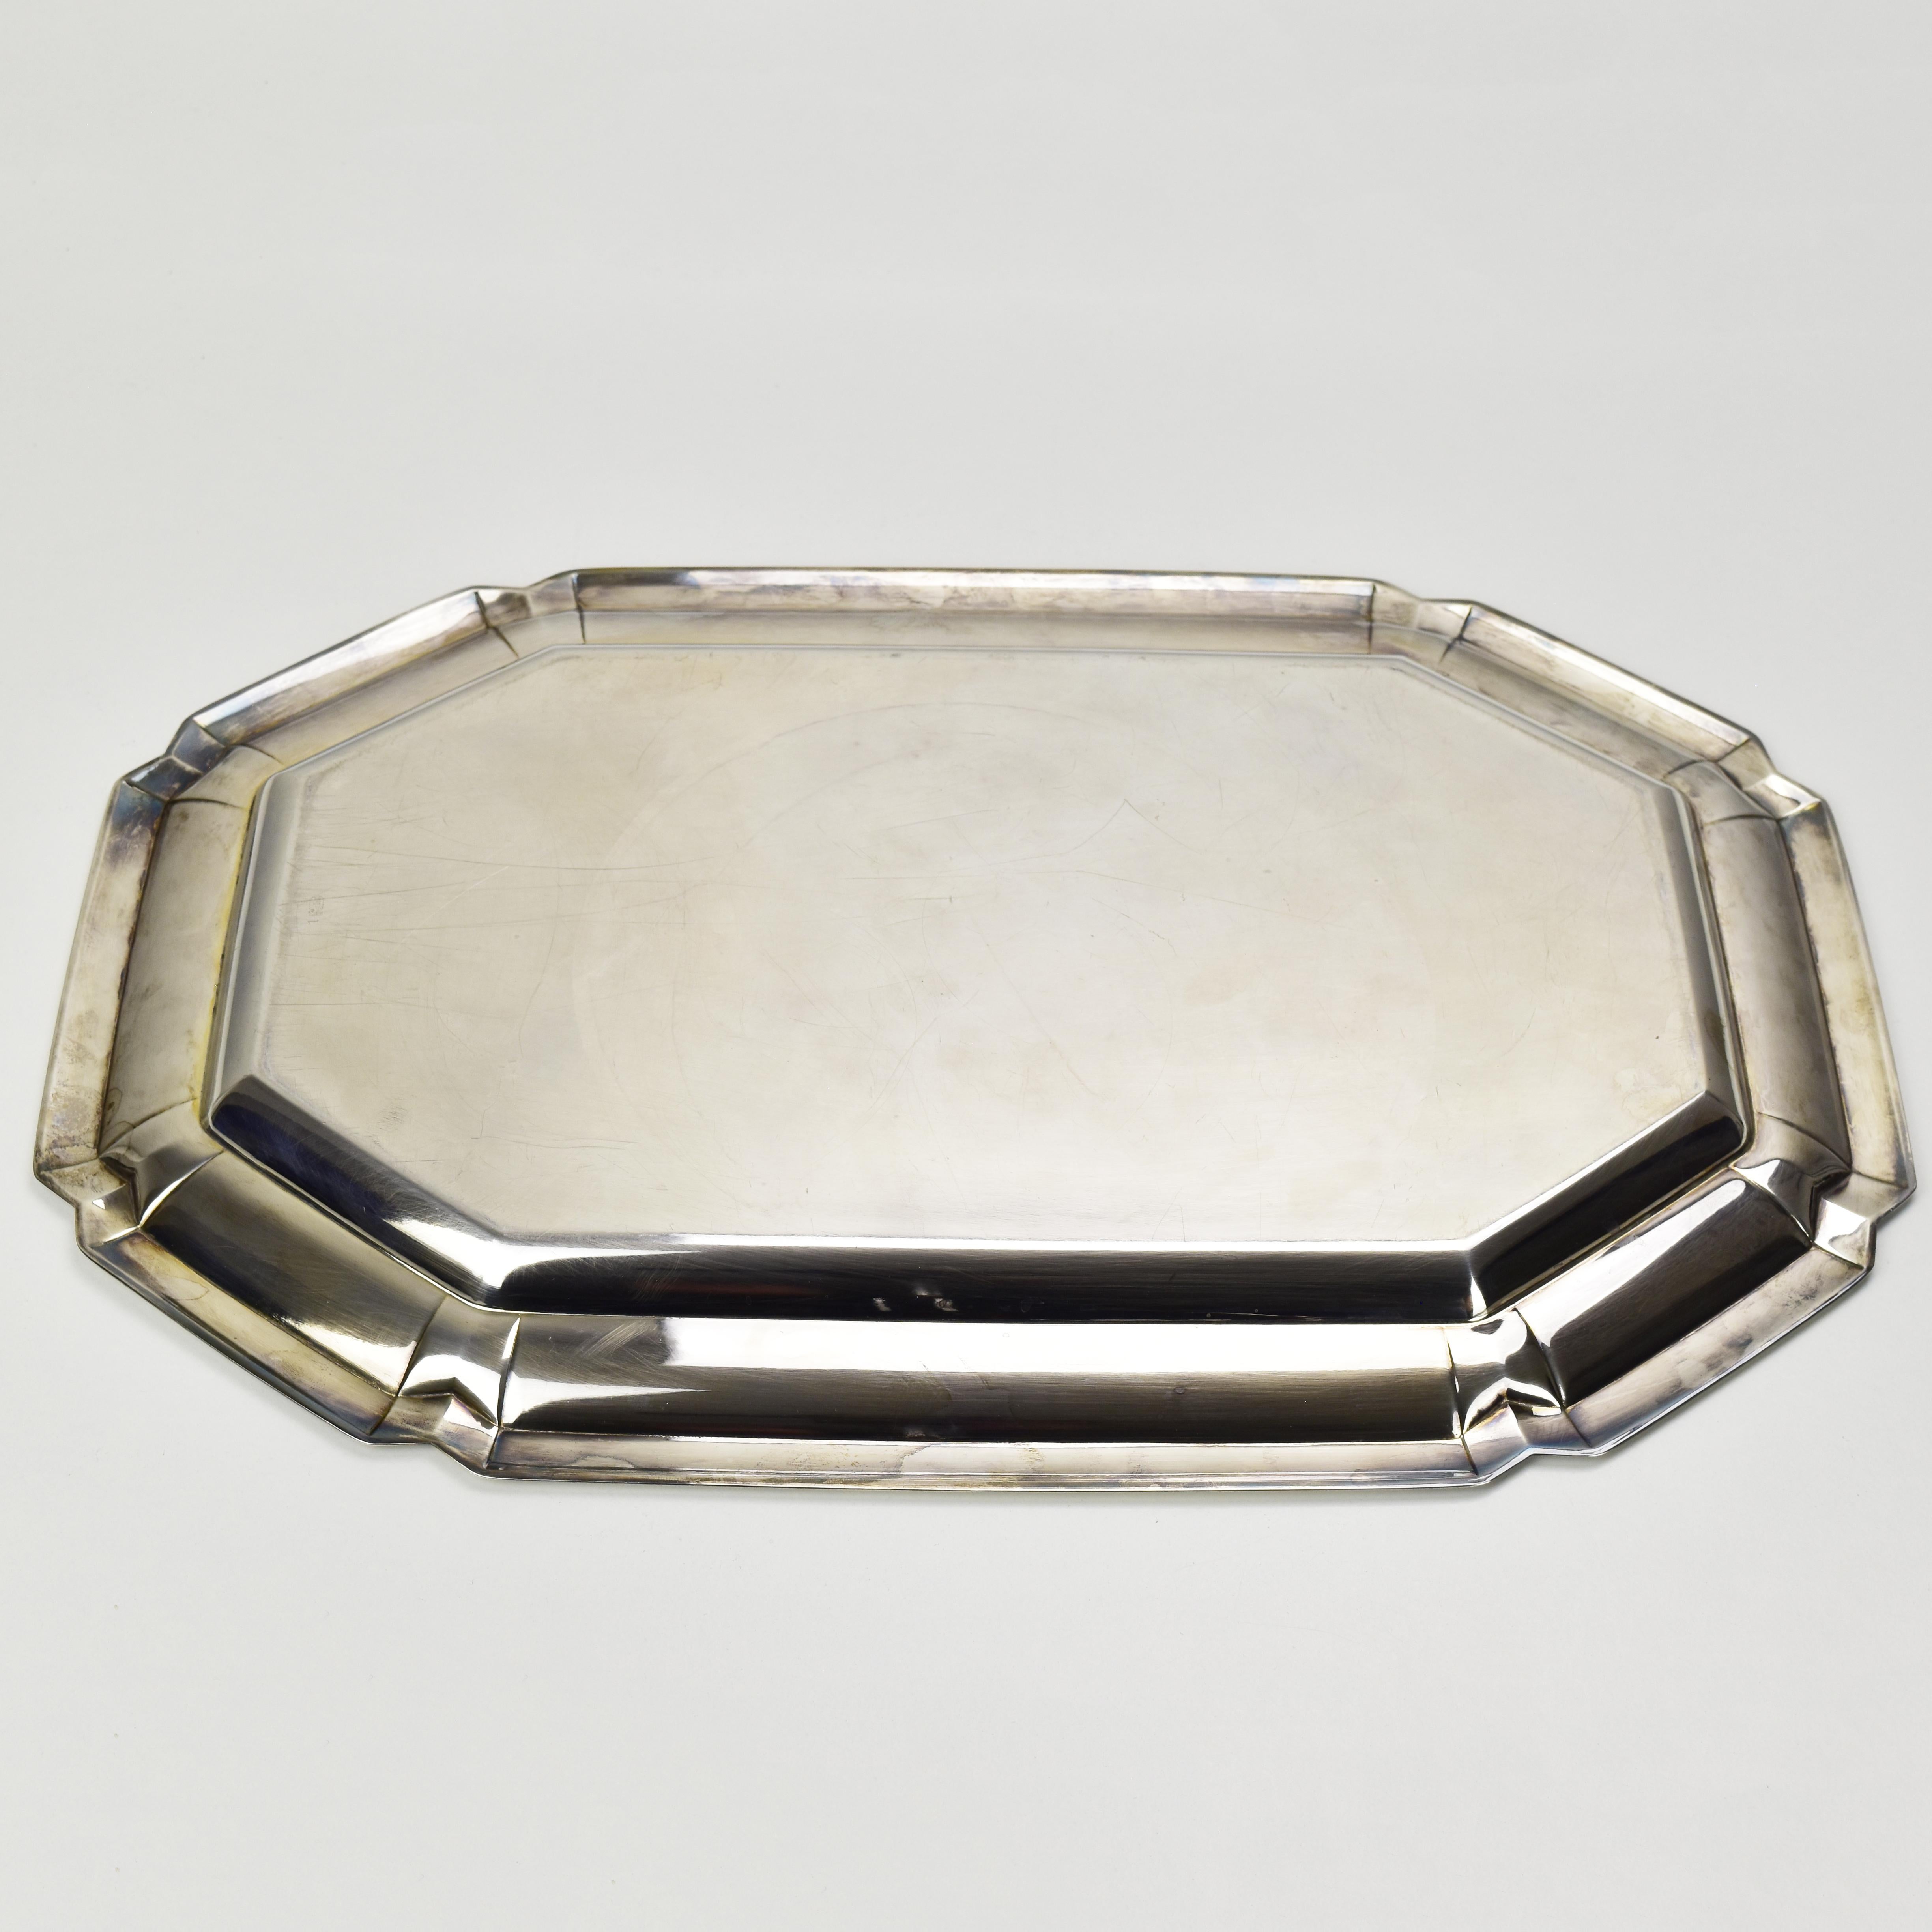 Large Art Deco Cabaret Bar Snack Tray by Quist Silverplate & Cut Crystal Liners For Sale 8